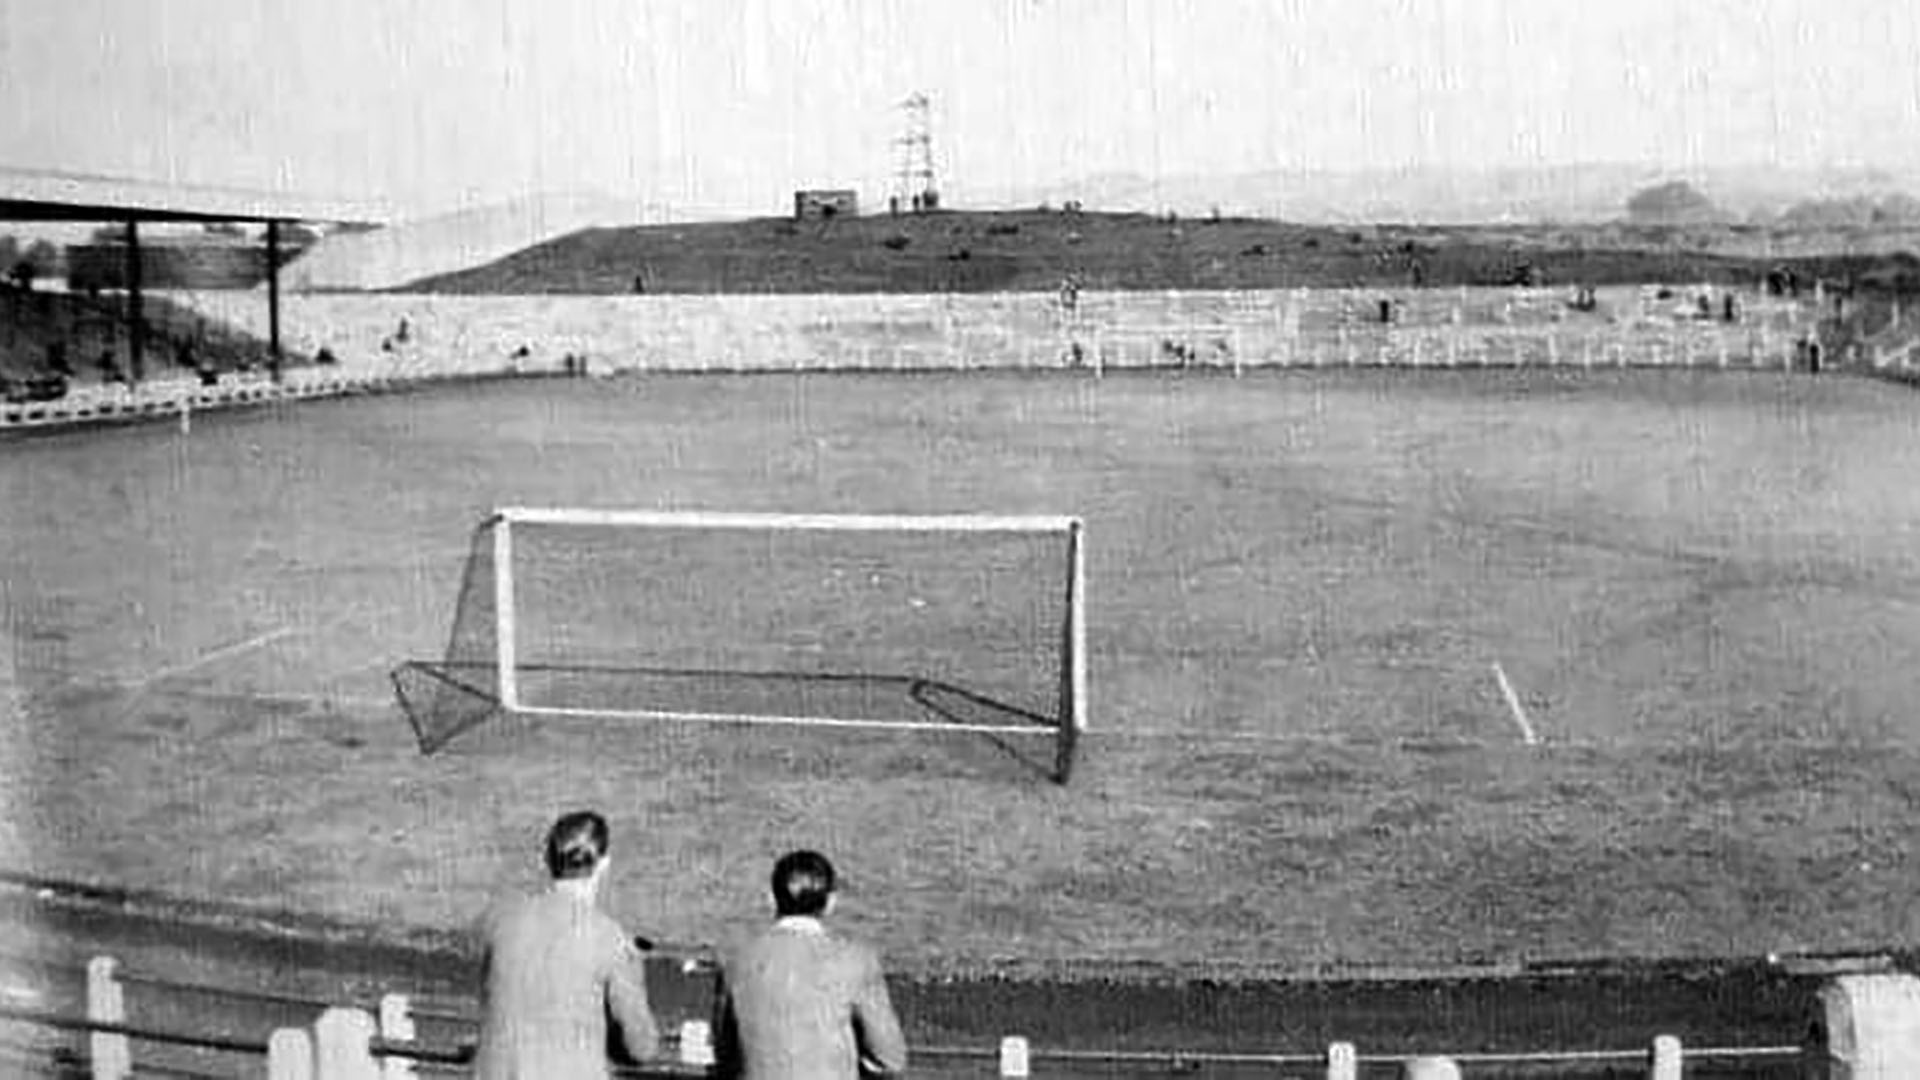 A Second World War pillbox stands on the banking at the Sydenham End of The Oval, home to Glentoran Football Club in East Belfast.